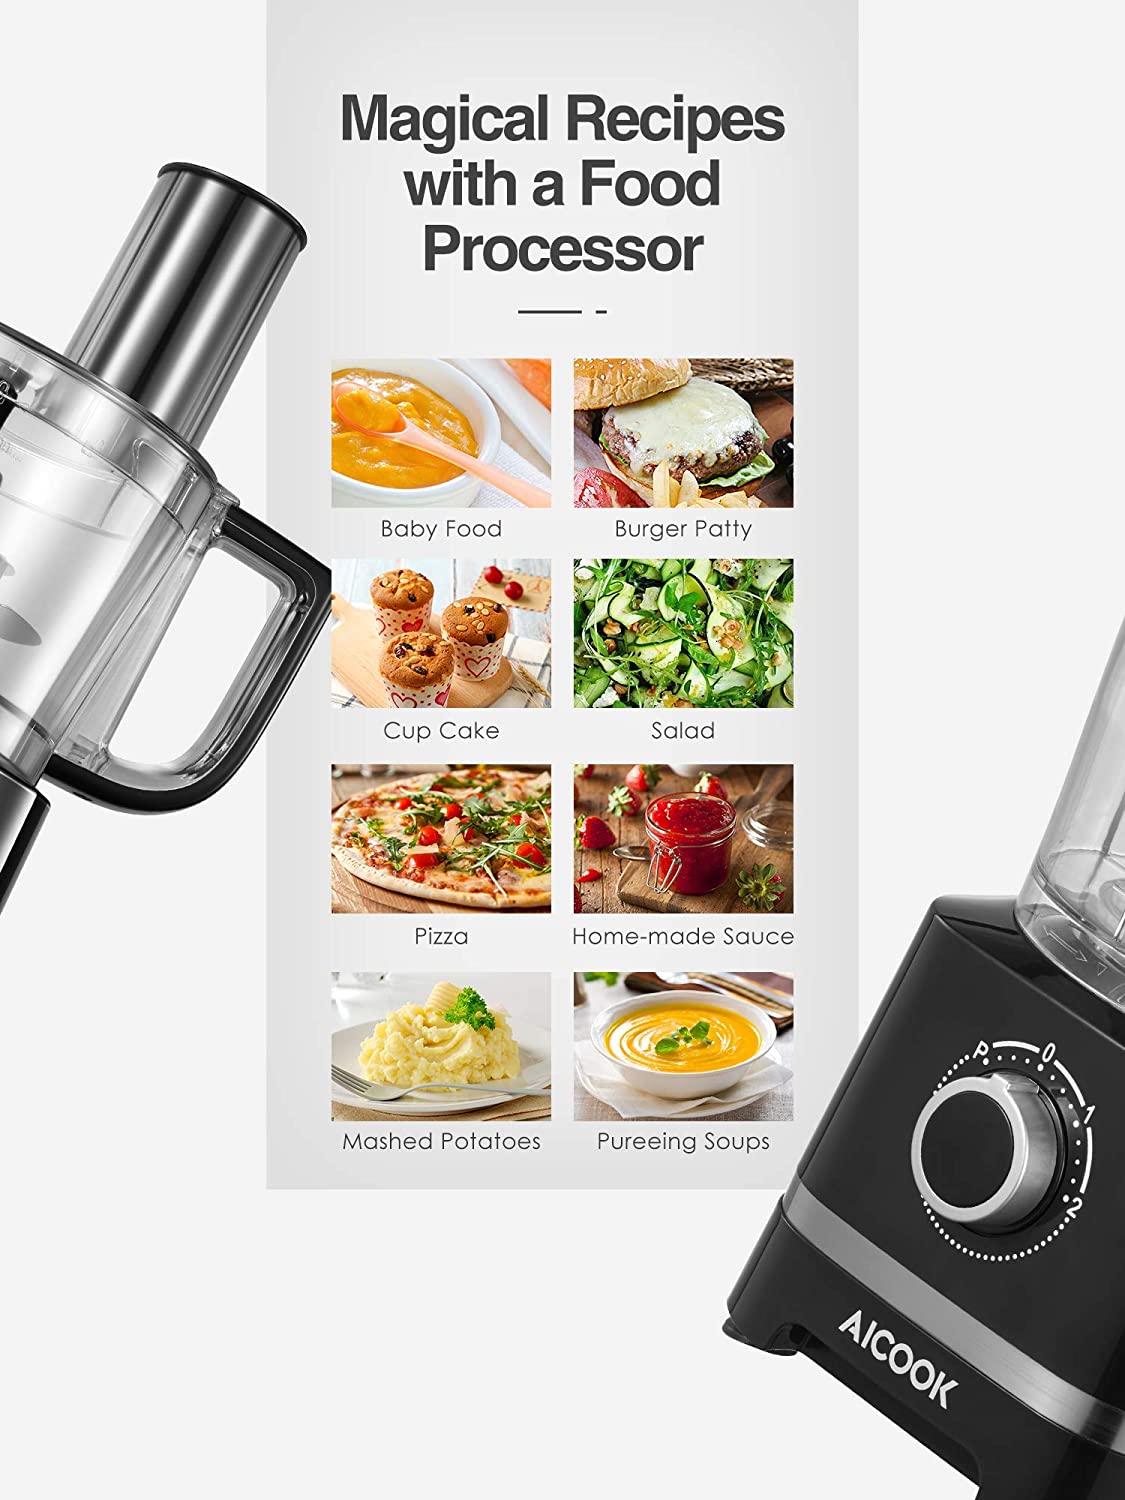 AICOOK | Food Processor, 12-Cup Food Chopper with 16 Functions, 4 Speeds Vegetable Chopper for Chopping, Pureeing, Mixing, Shredding, Whisking Eggs and Slicing